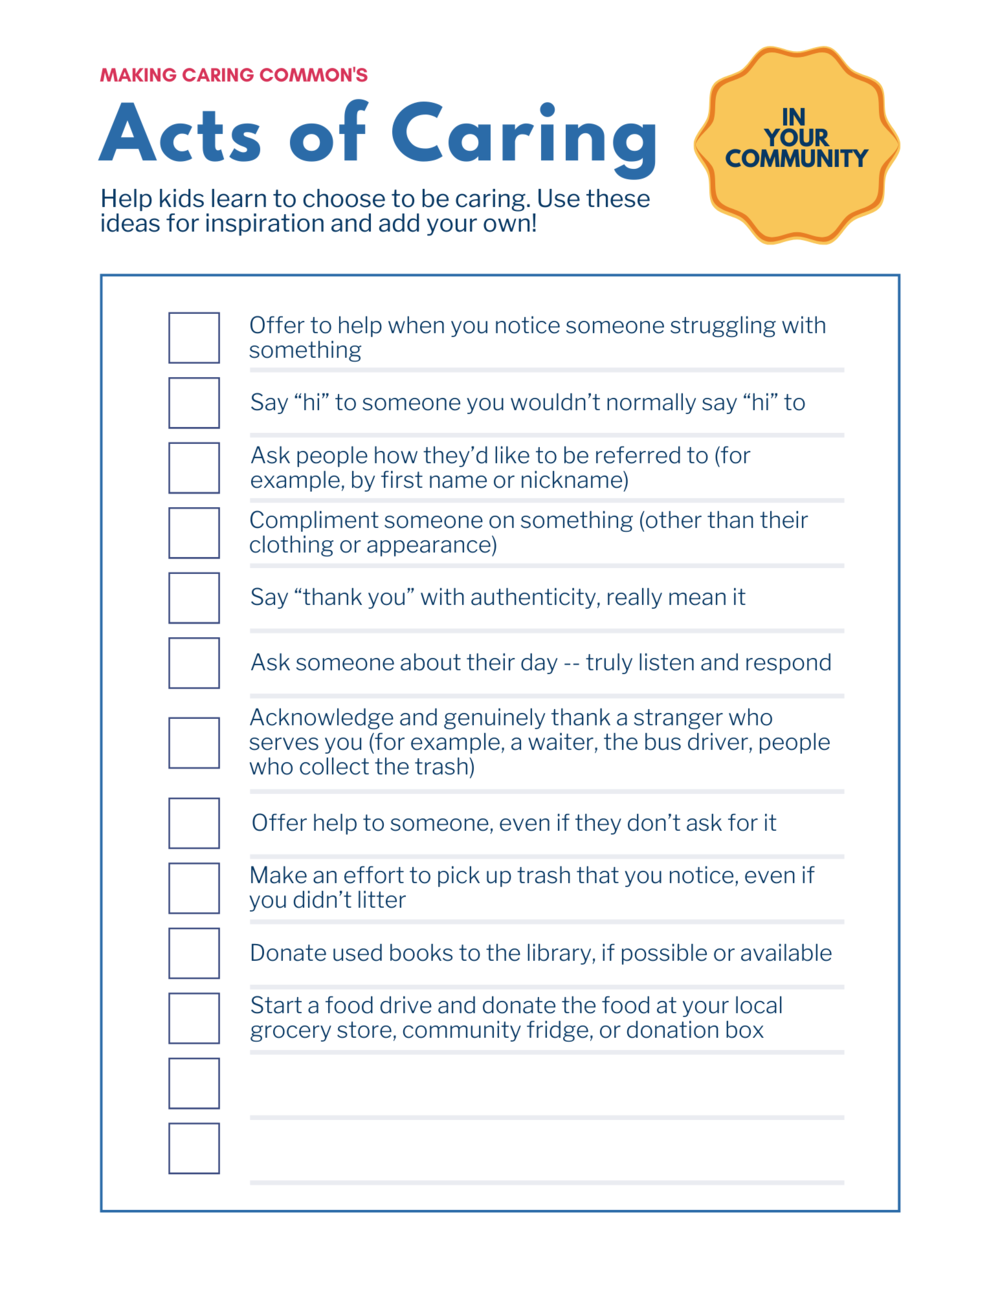 MCC Website-Empathy-3-acts-of-caring (2).png